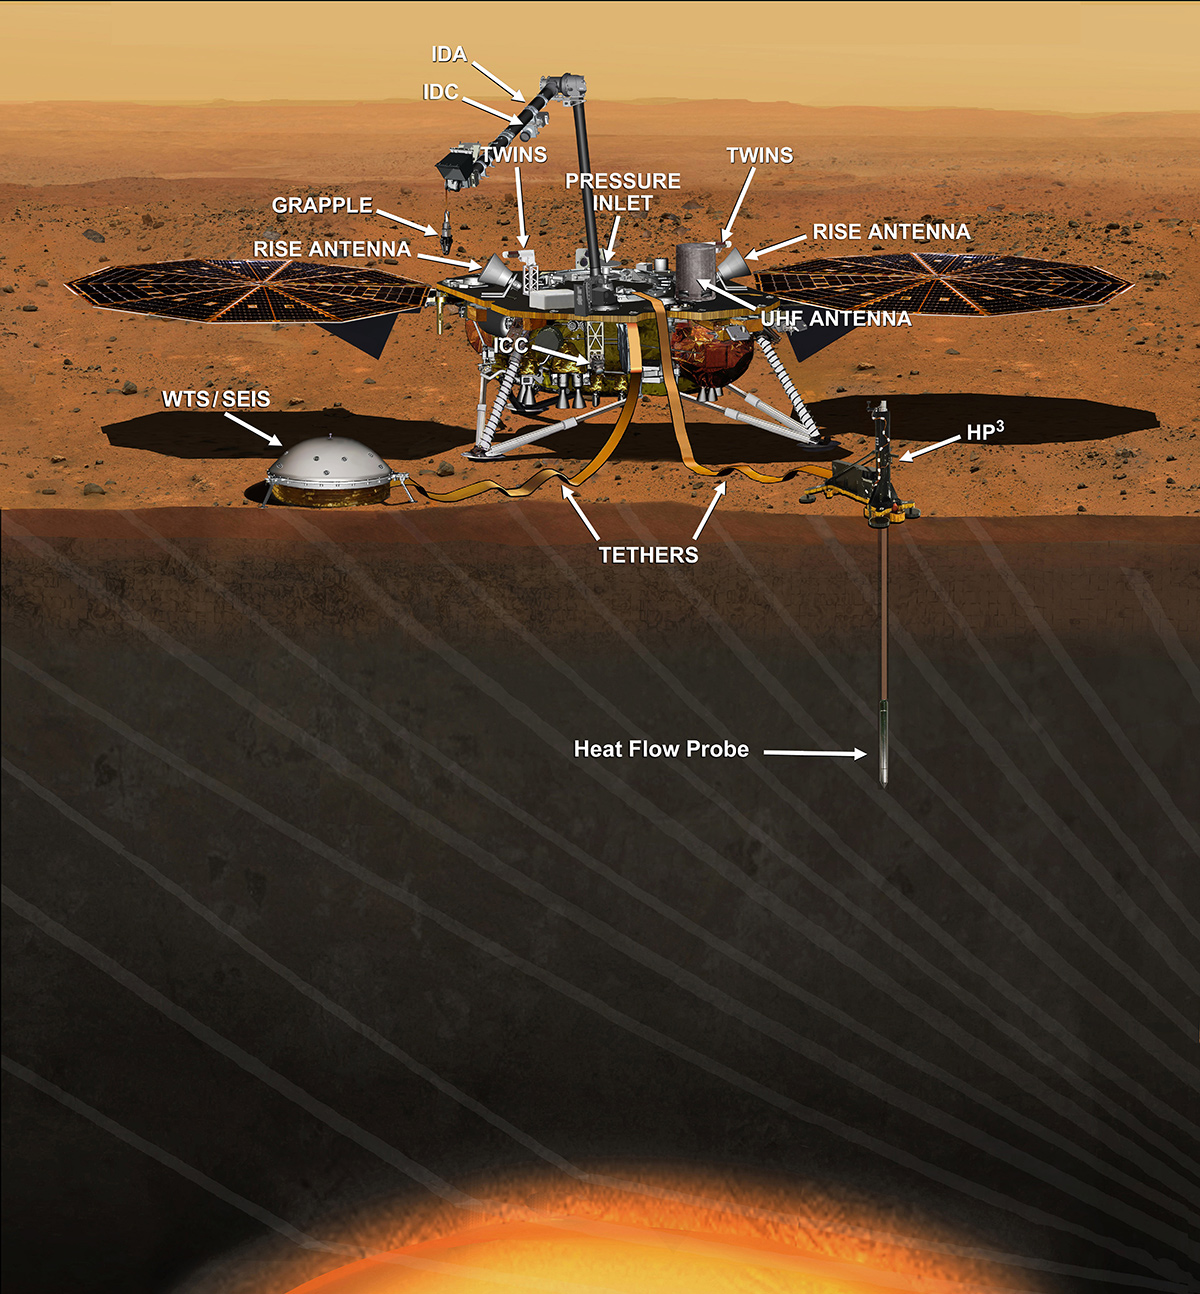 This artist's concept from August 2015 depicts NASA's InSight Mars lander fully deployed for studying the deep interior of Mars.